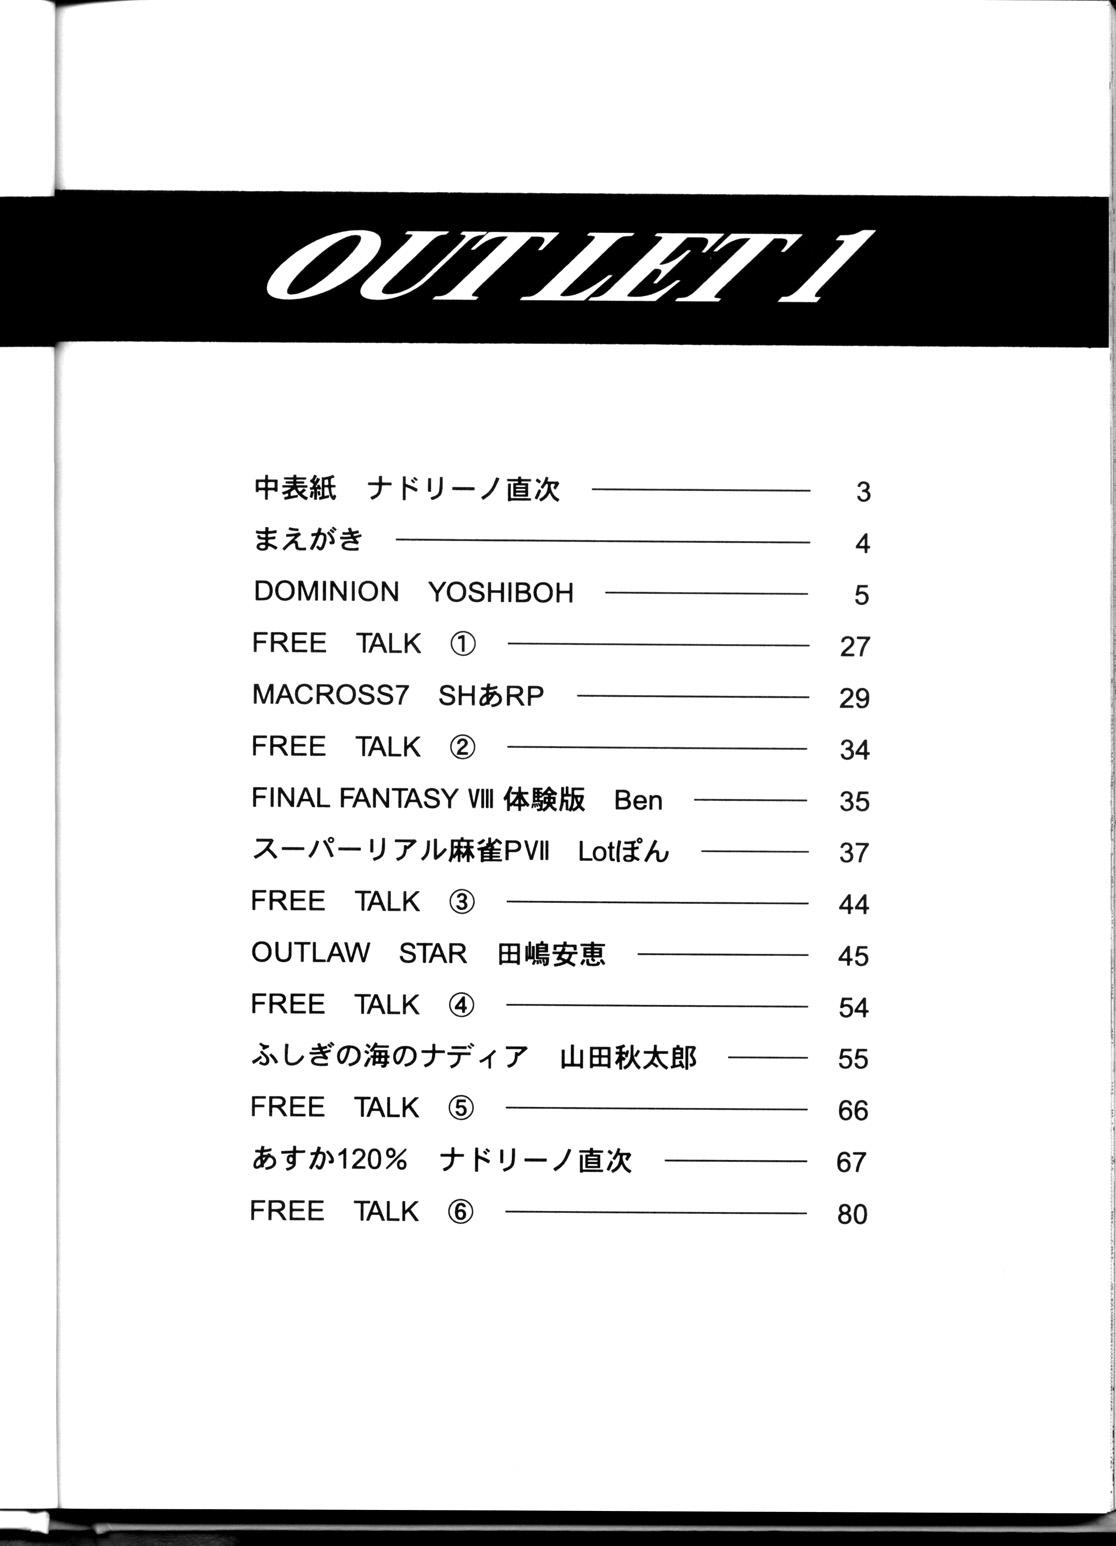 OUTLET 1 79